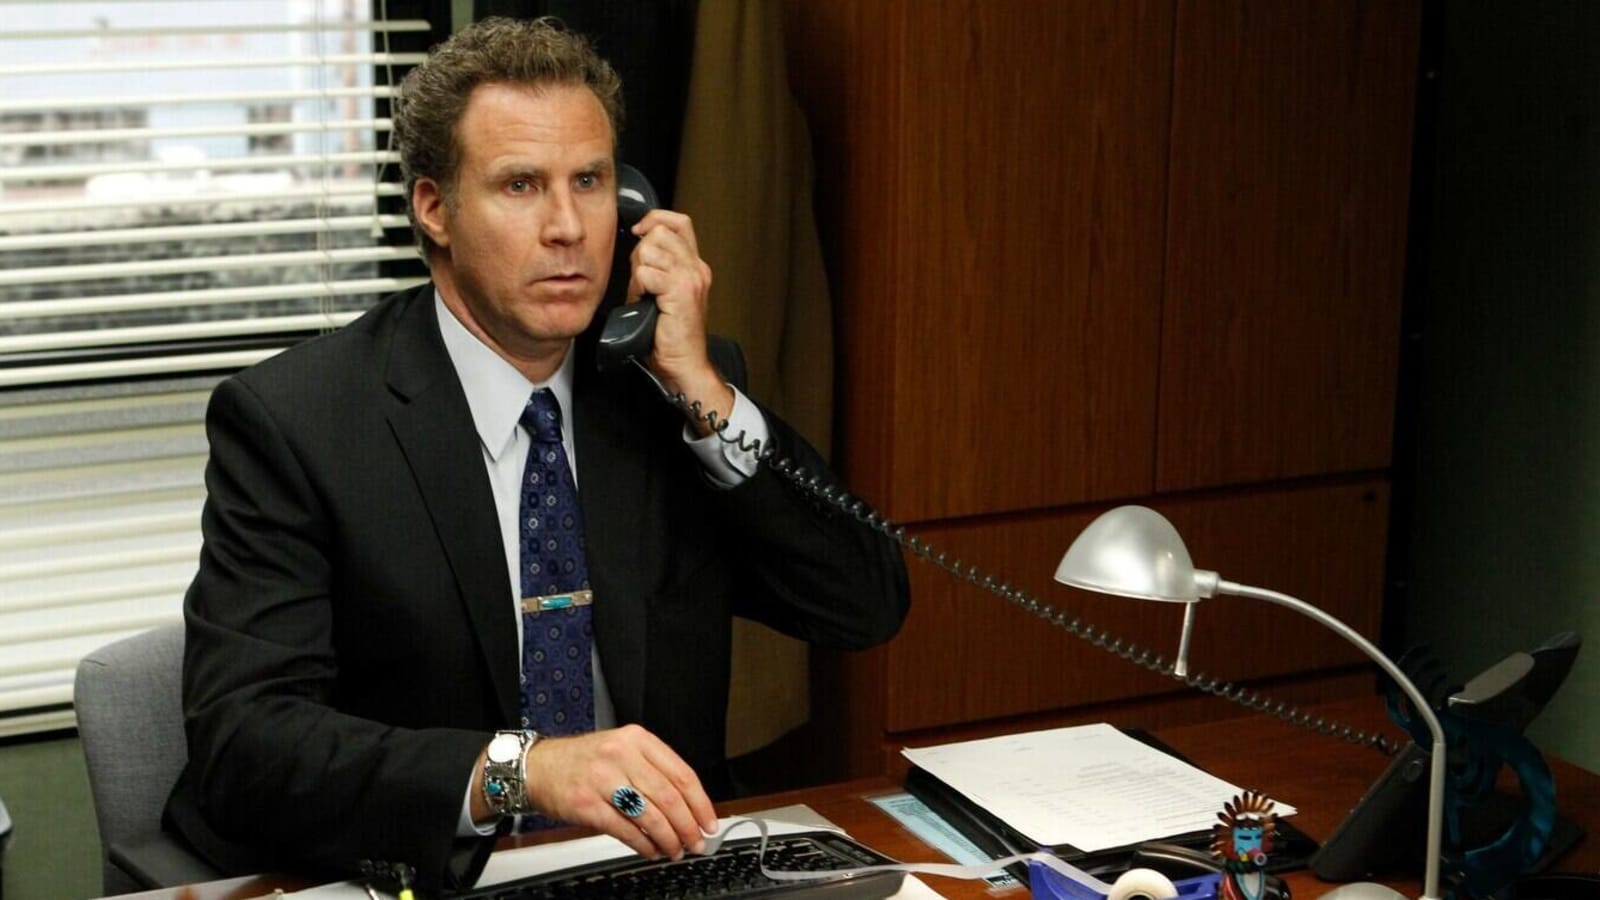 20 celebrities who guest starred on 'The Office'